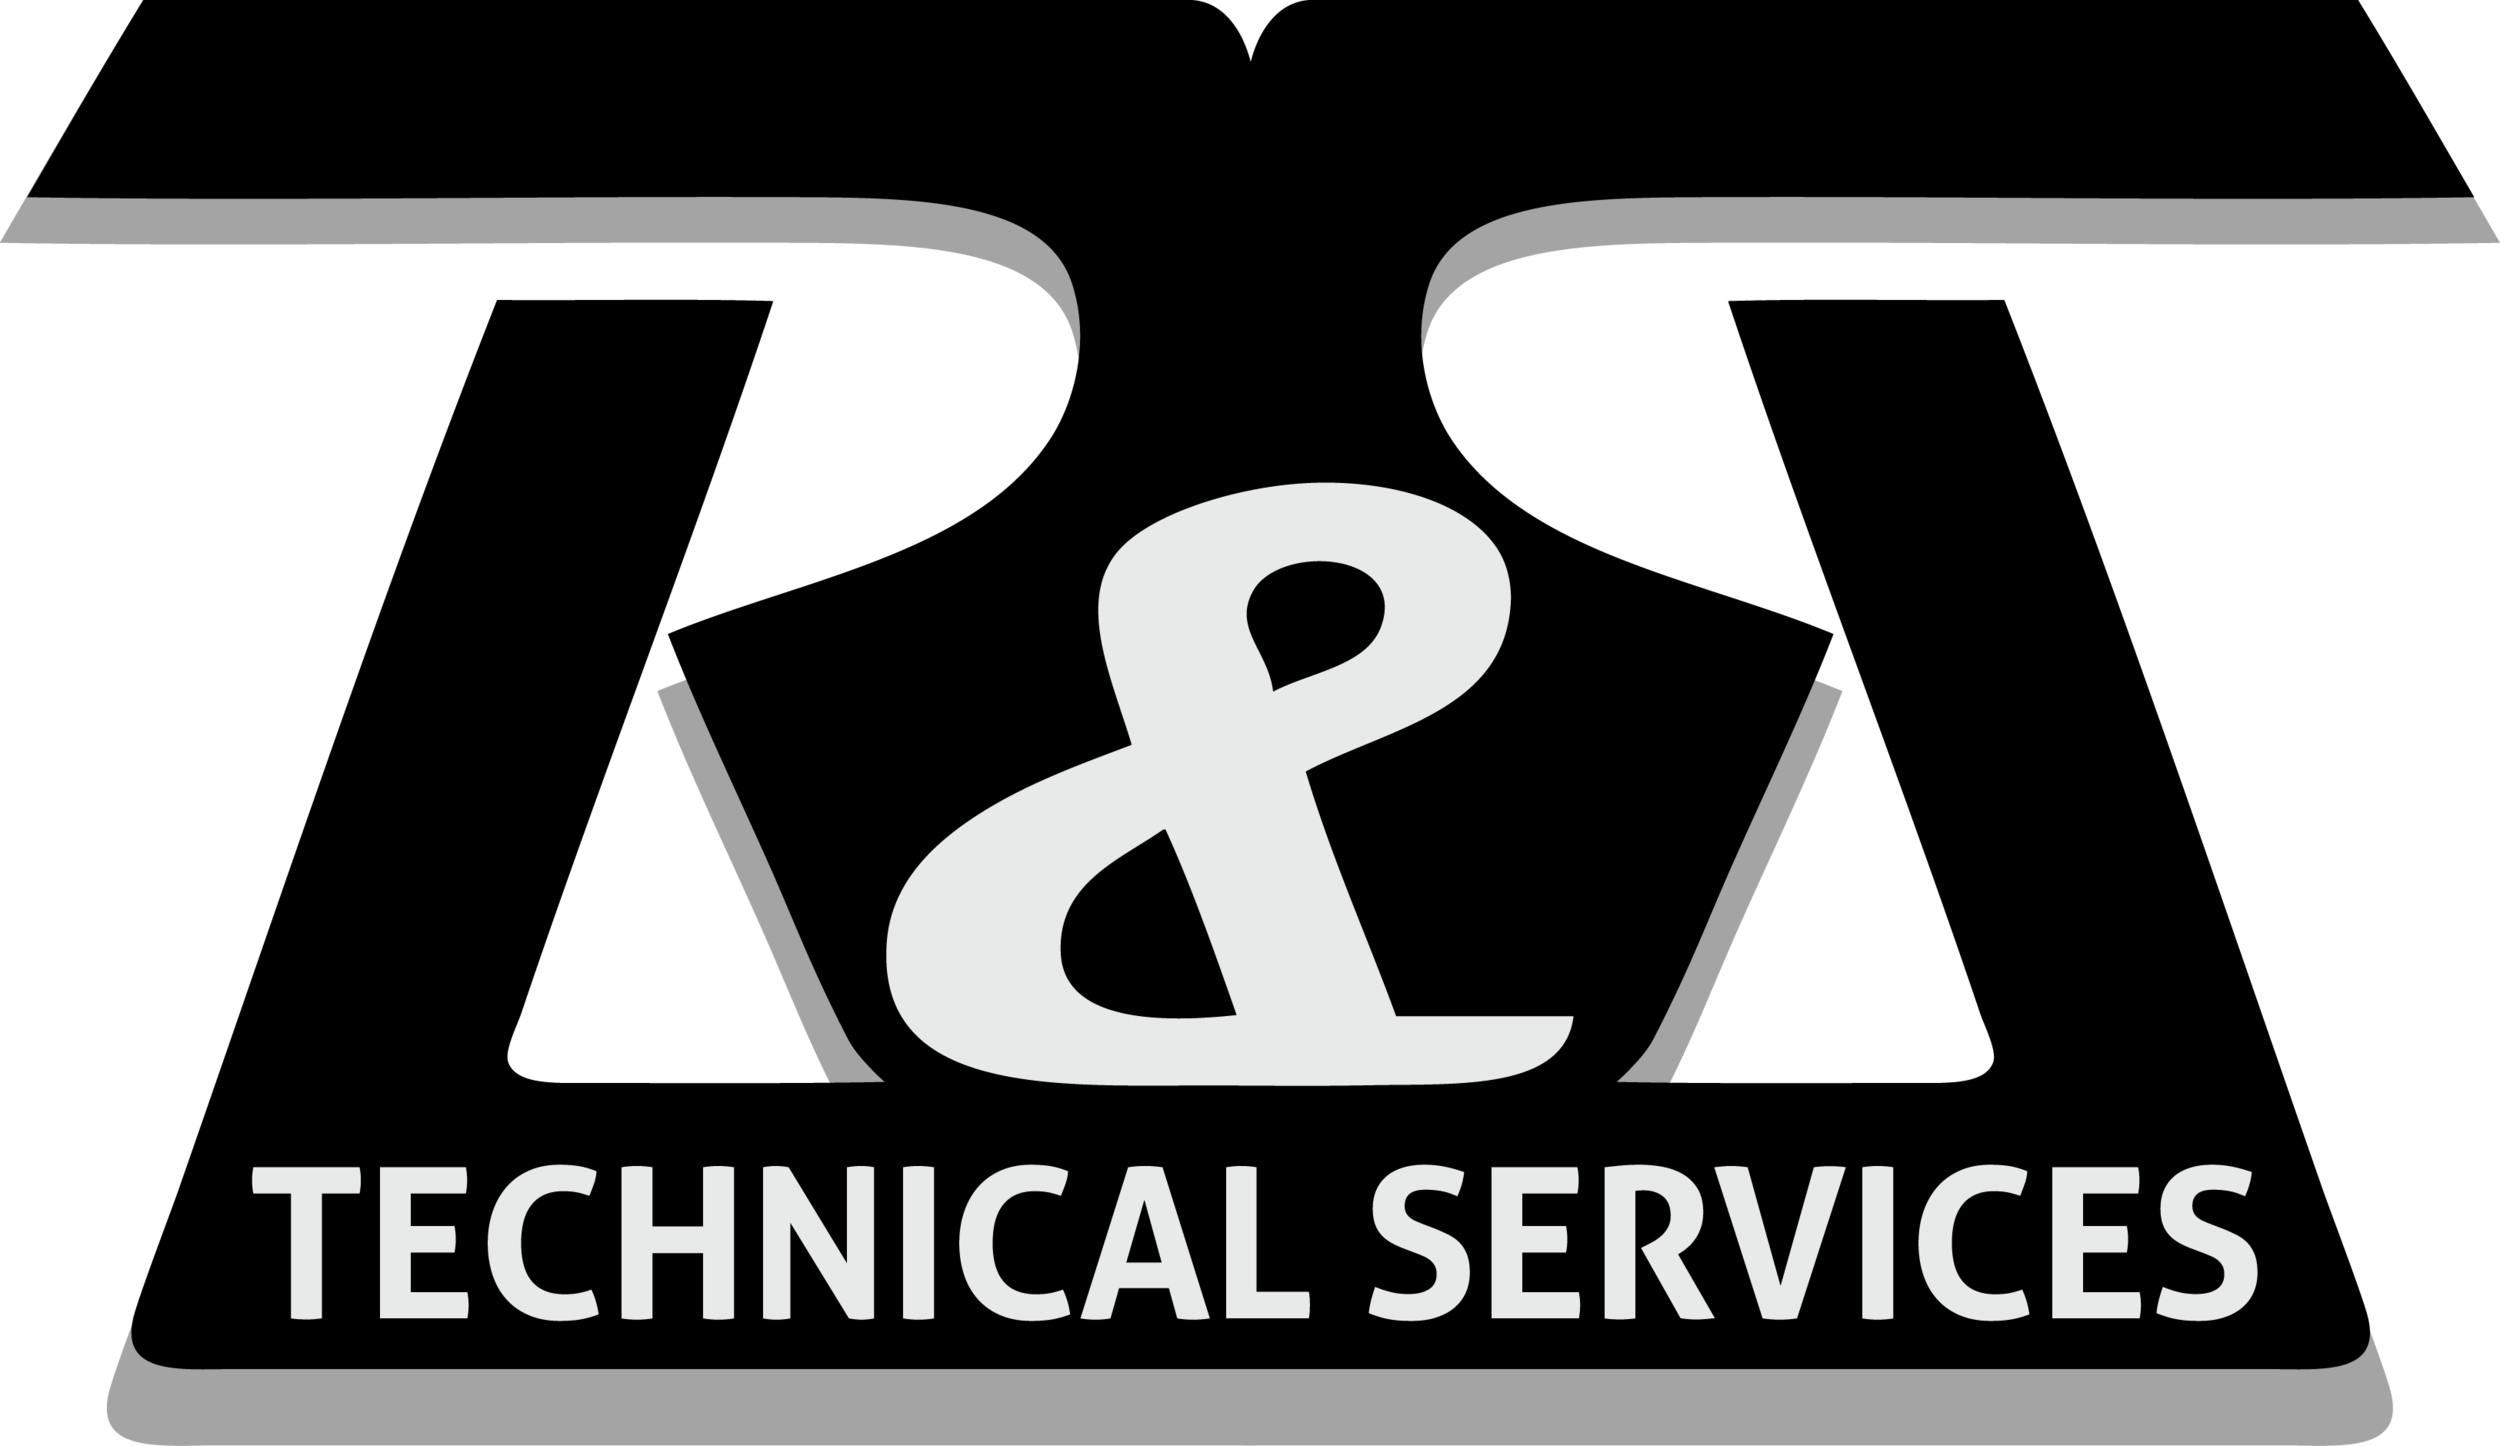 R&amp;R Technical Services 